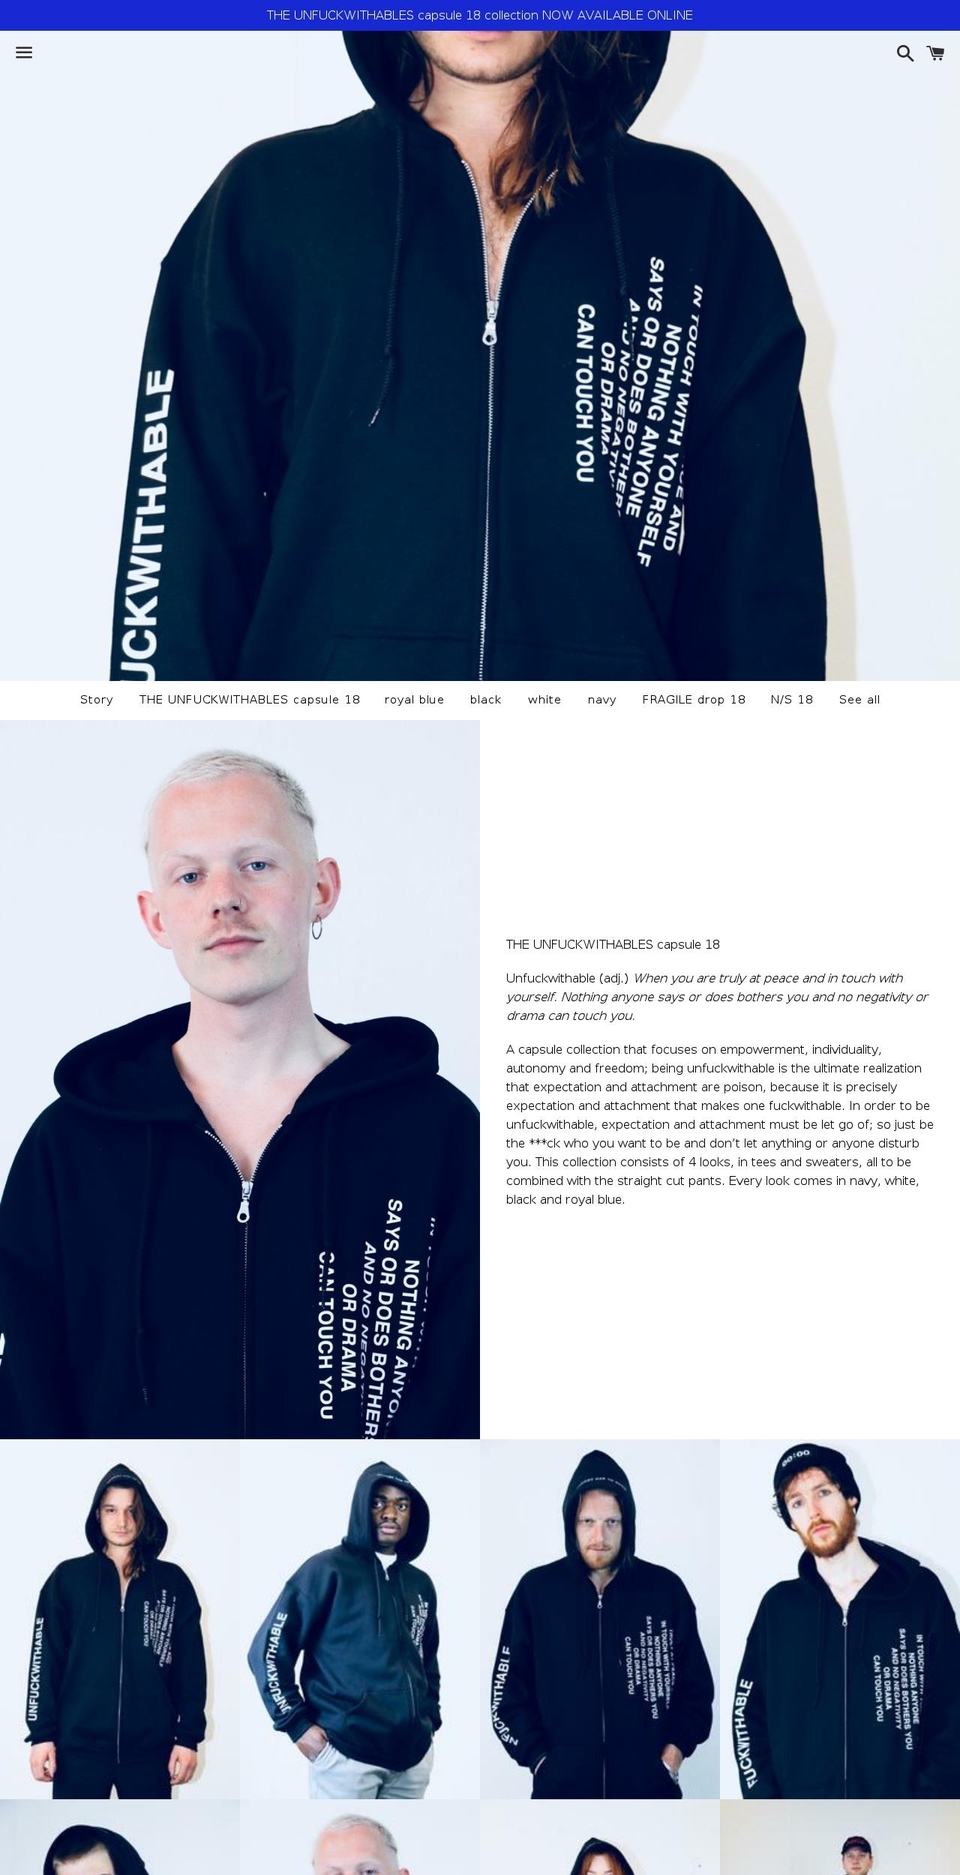 Copy of Boundless Shopify theme site example genderfree.nl